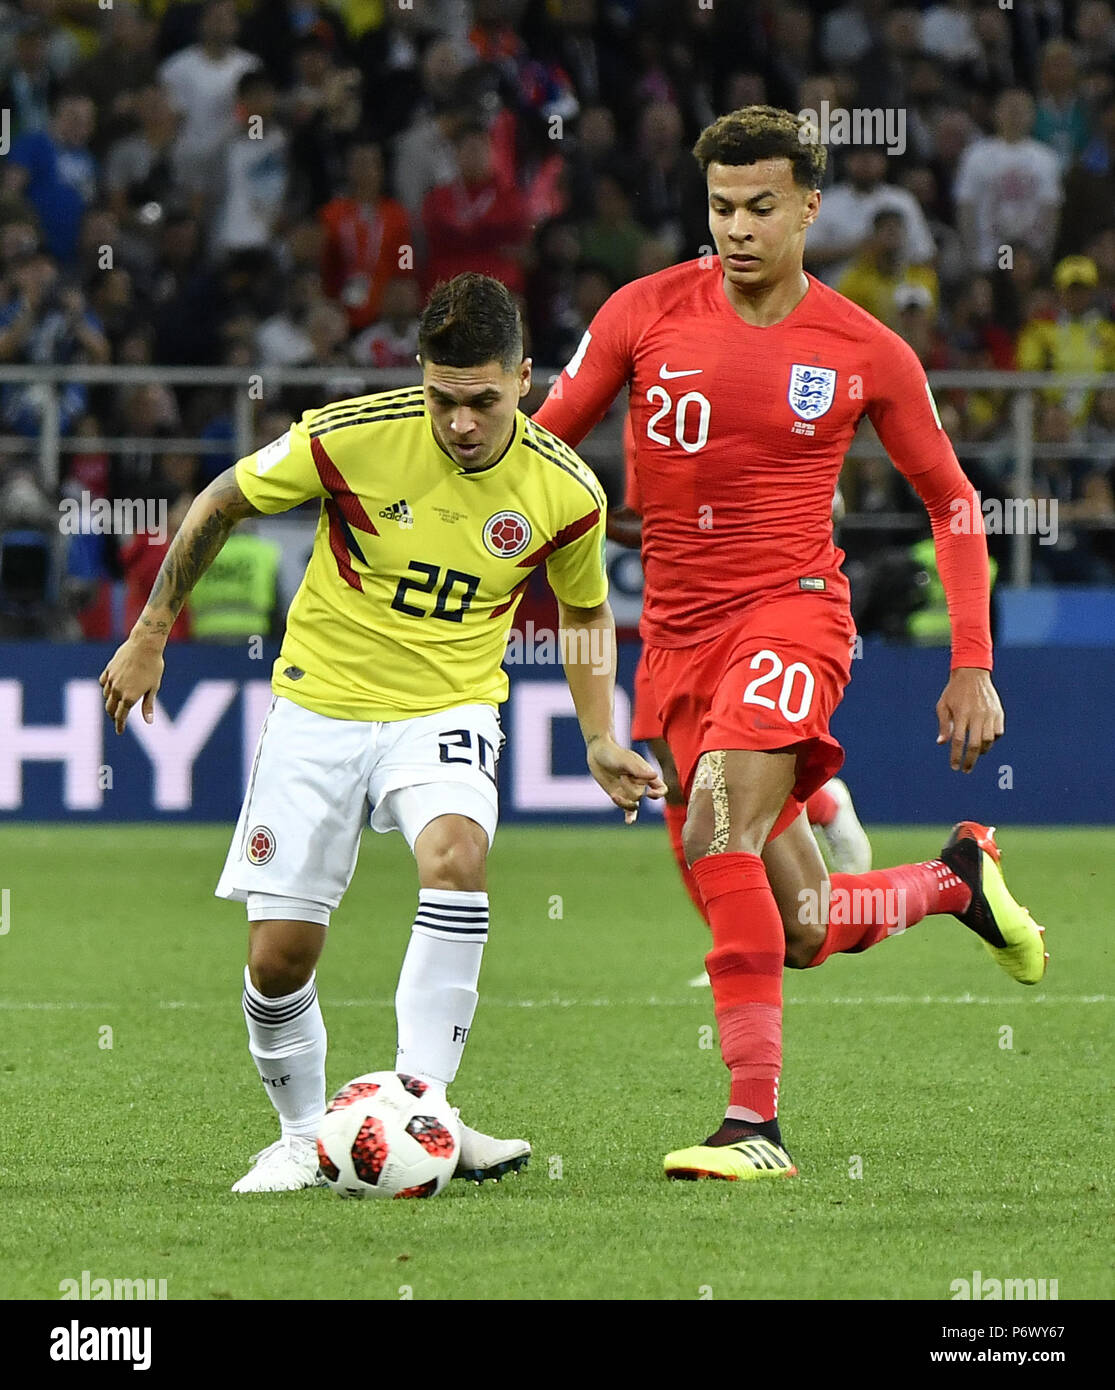 Moscow, Russia. 3rd July, 2018. Dele Alli (R) of England vies with Juan Quintero of Colombia during the 2018 FIFA World Cup round of 16 match between England and Colombia in Moscow, Russia, July 3, 2018. Credit: He Canling/Xinhua/Alamy Live News Stock Photo